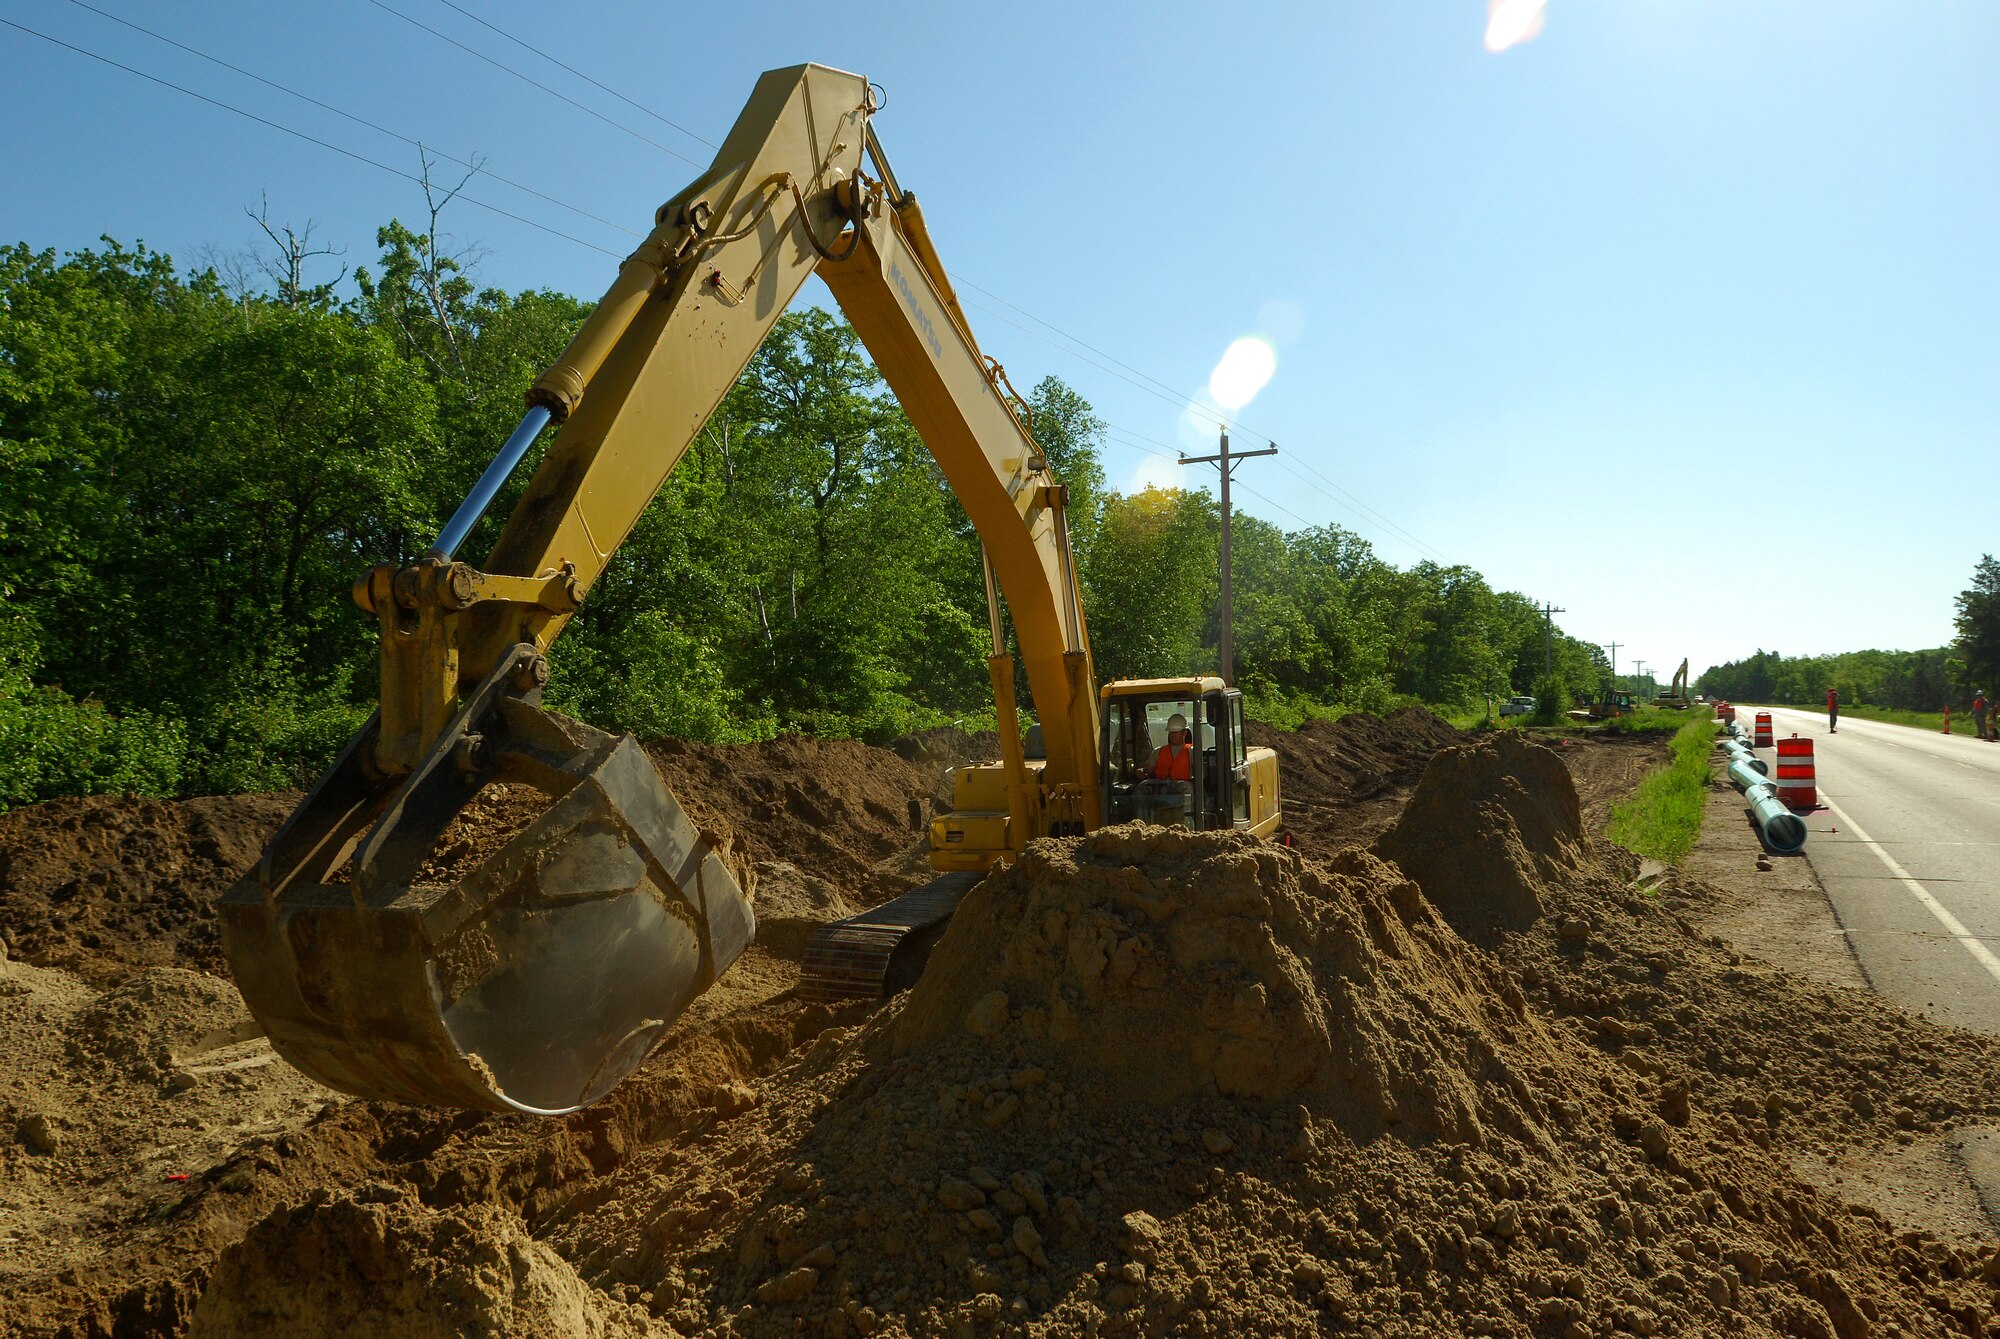 Members of the 433rd Civil Engineering Squadron conduct a humanitarian mission in the Red Lake Indian Reservation for the Red Lake band of Chippewa Indians, just outside of Bemidji, Minnesota. Staff Sgt. Garret Was, 446th CES Lewis-McChord Joint Base, Washington, operates an excavator to dig a ditch where a 12-inch water main will be installed. (U.S. Air Force photo/Airman 1st Class Brian McGloin)